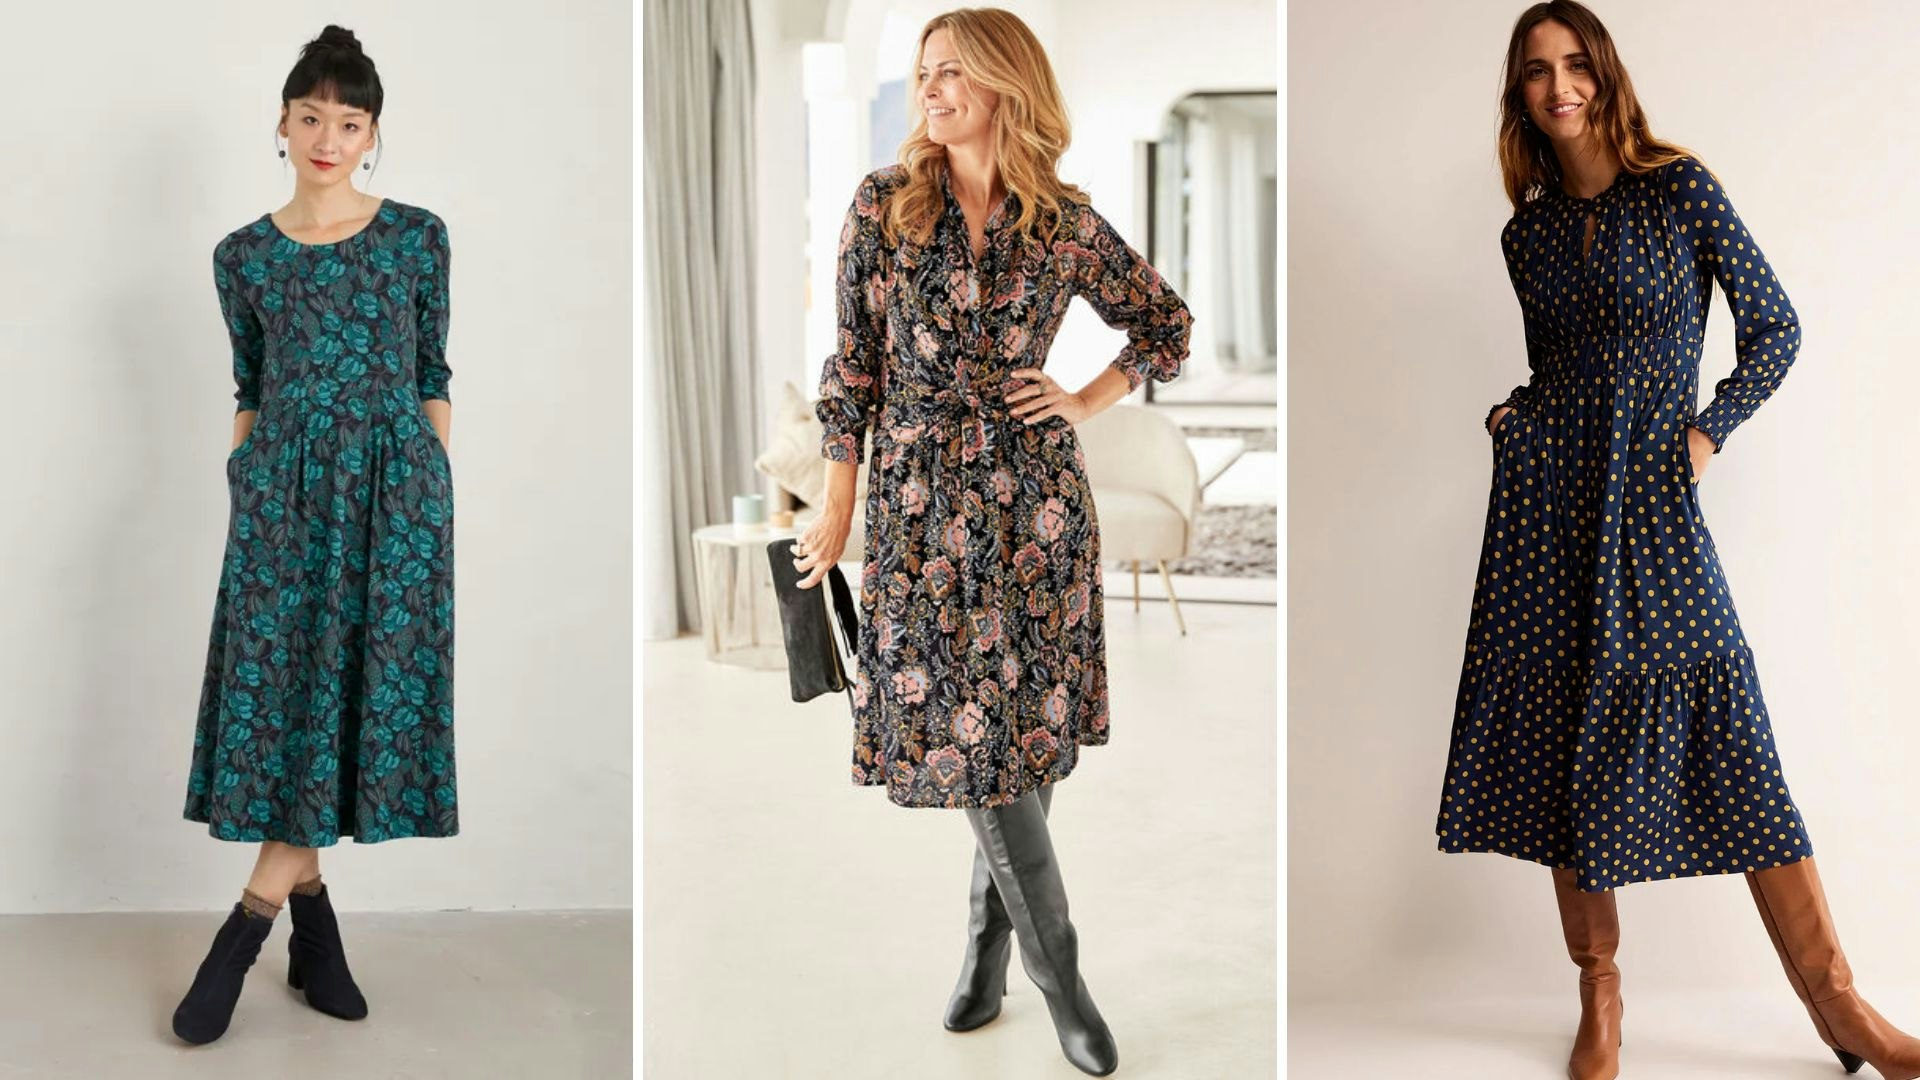 The Tunic as a Dressy Option in Winter for Women over 50